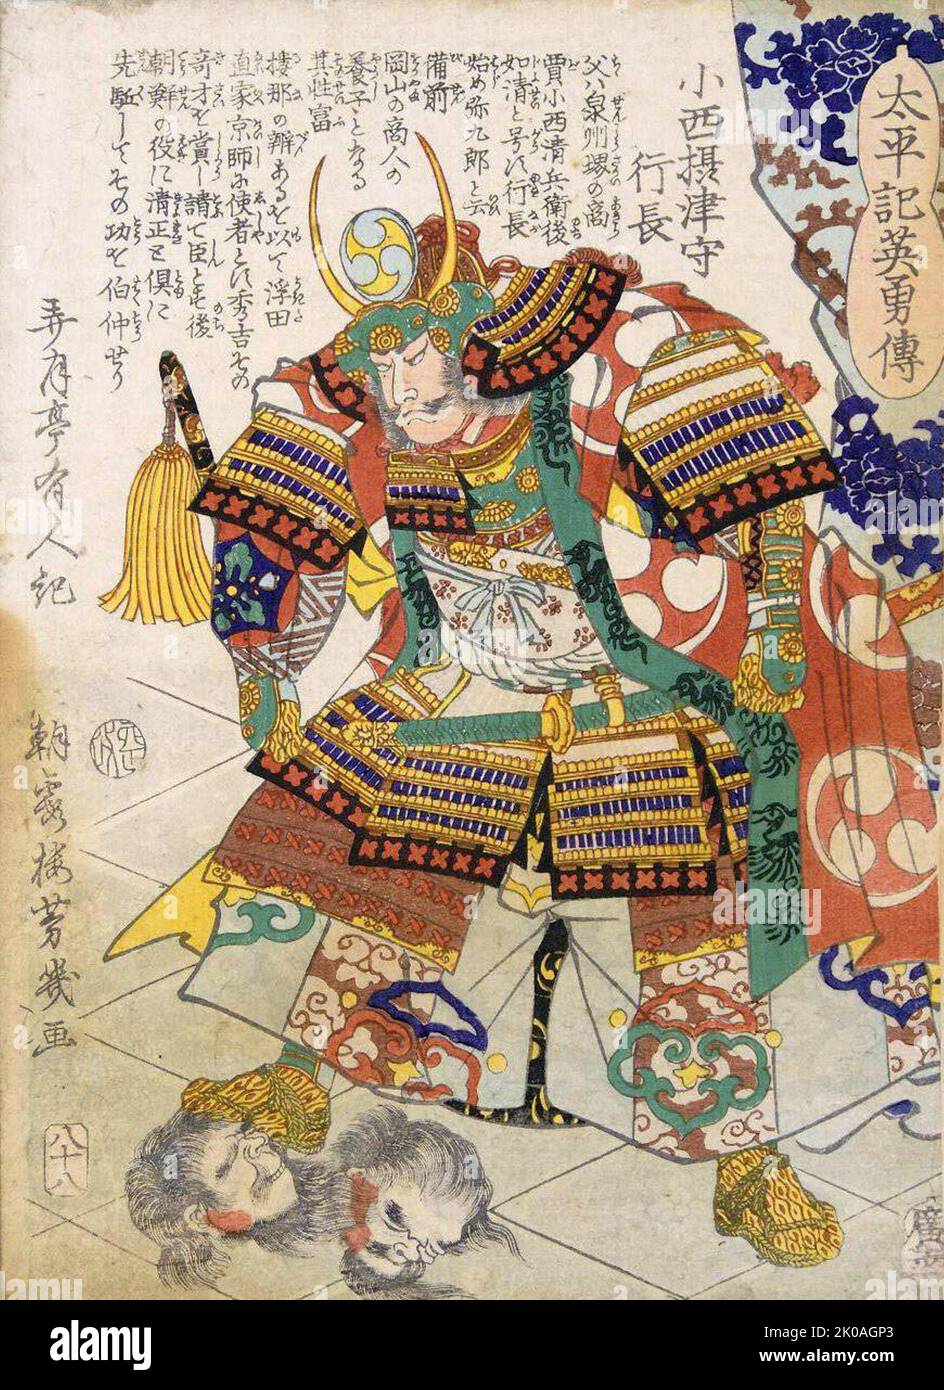 Konishi Yukinaga (1555 - 1600 ) Japanese samurai and daimyo under the command of Toyotomi Hideyoshi during the Azuchi-Momoyama period of Japanese history . In 1587, during the invasion of Kyushu, he quelled a local revolt in the province of Figa so he was rewarded with a fief in that province. Yukinaga commanded the first troops sent during the Japanese invasions of Korea, where he stood out for the capture of Busan and Seoul and the defense of Pyongyang.After Hideyoshi's death, Yukinaga joined Ishida Mitsunari 's side during the Battle of Sekigahara in 1600, where he defeated Tokugawa Ieyasu' Stock Photo